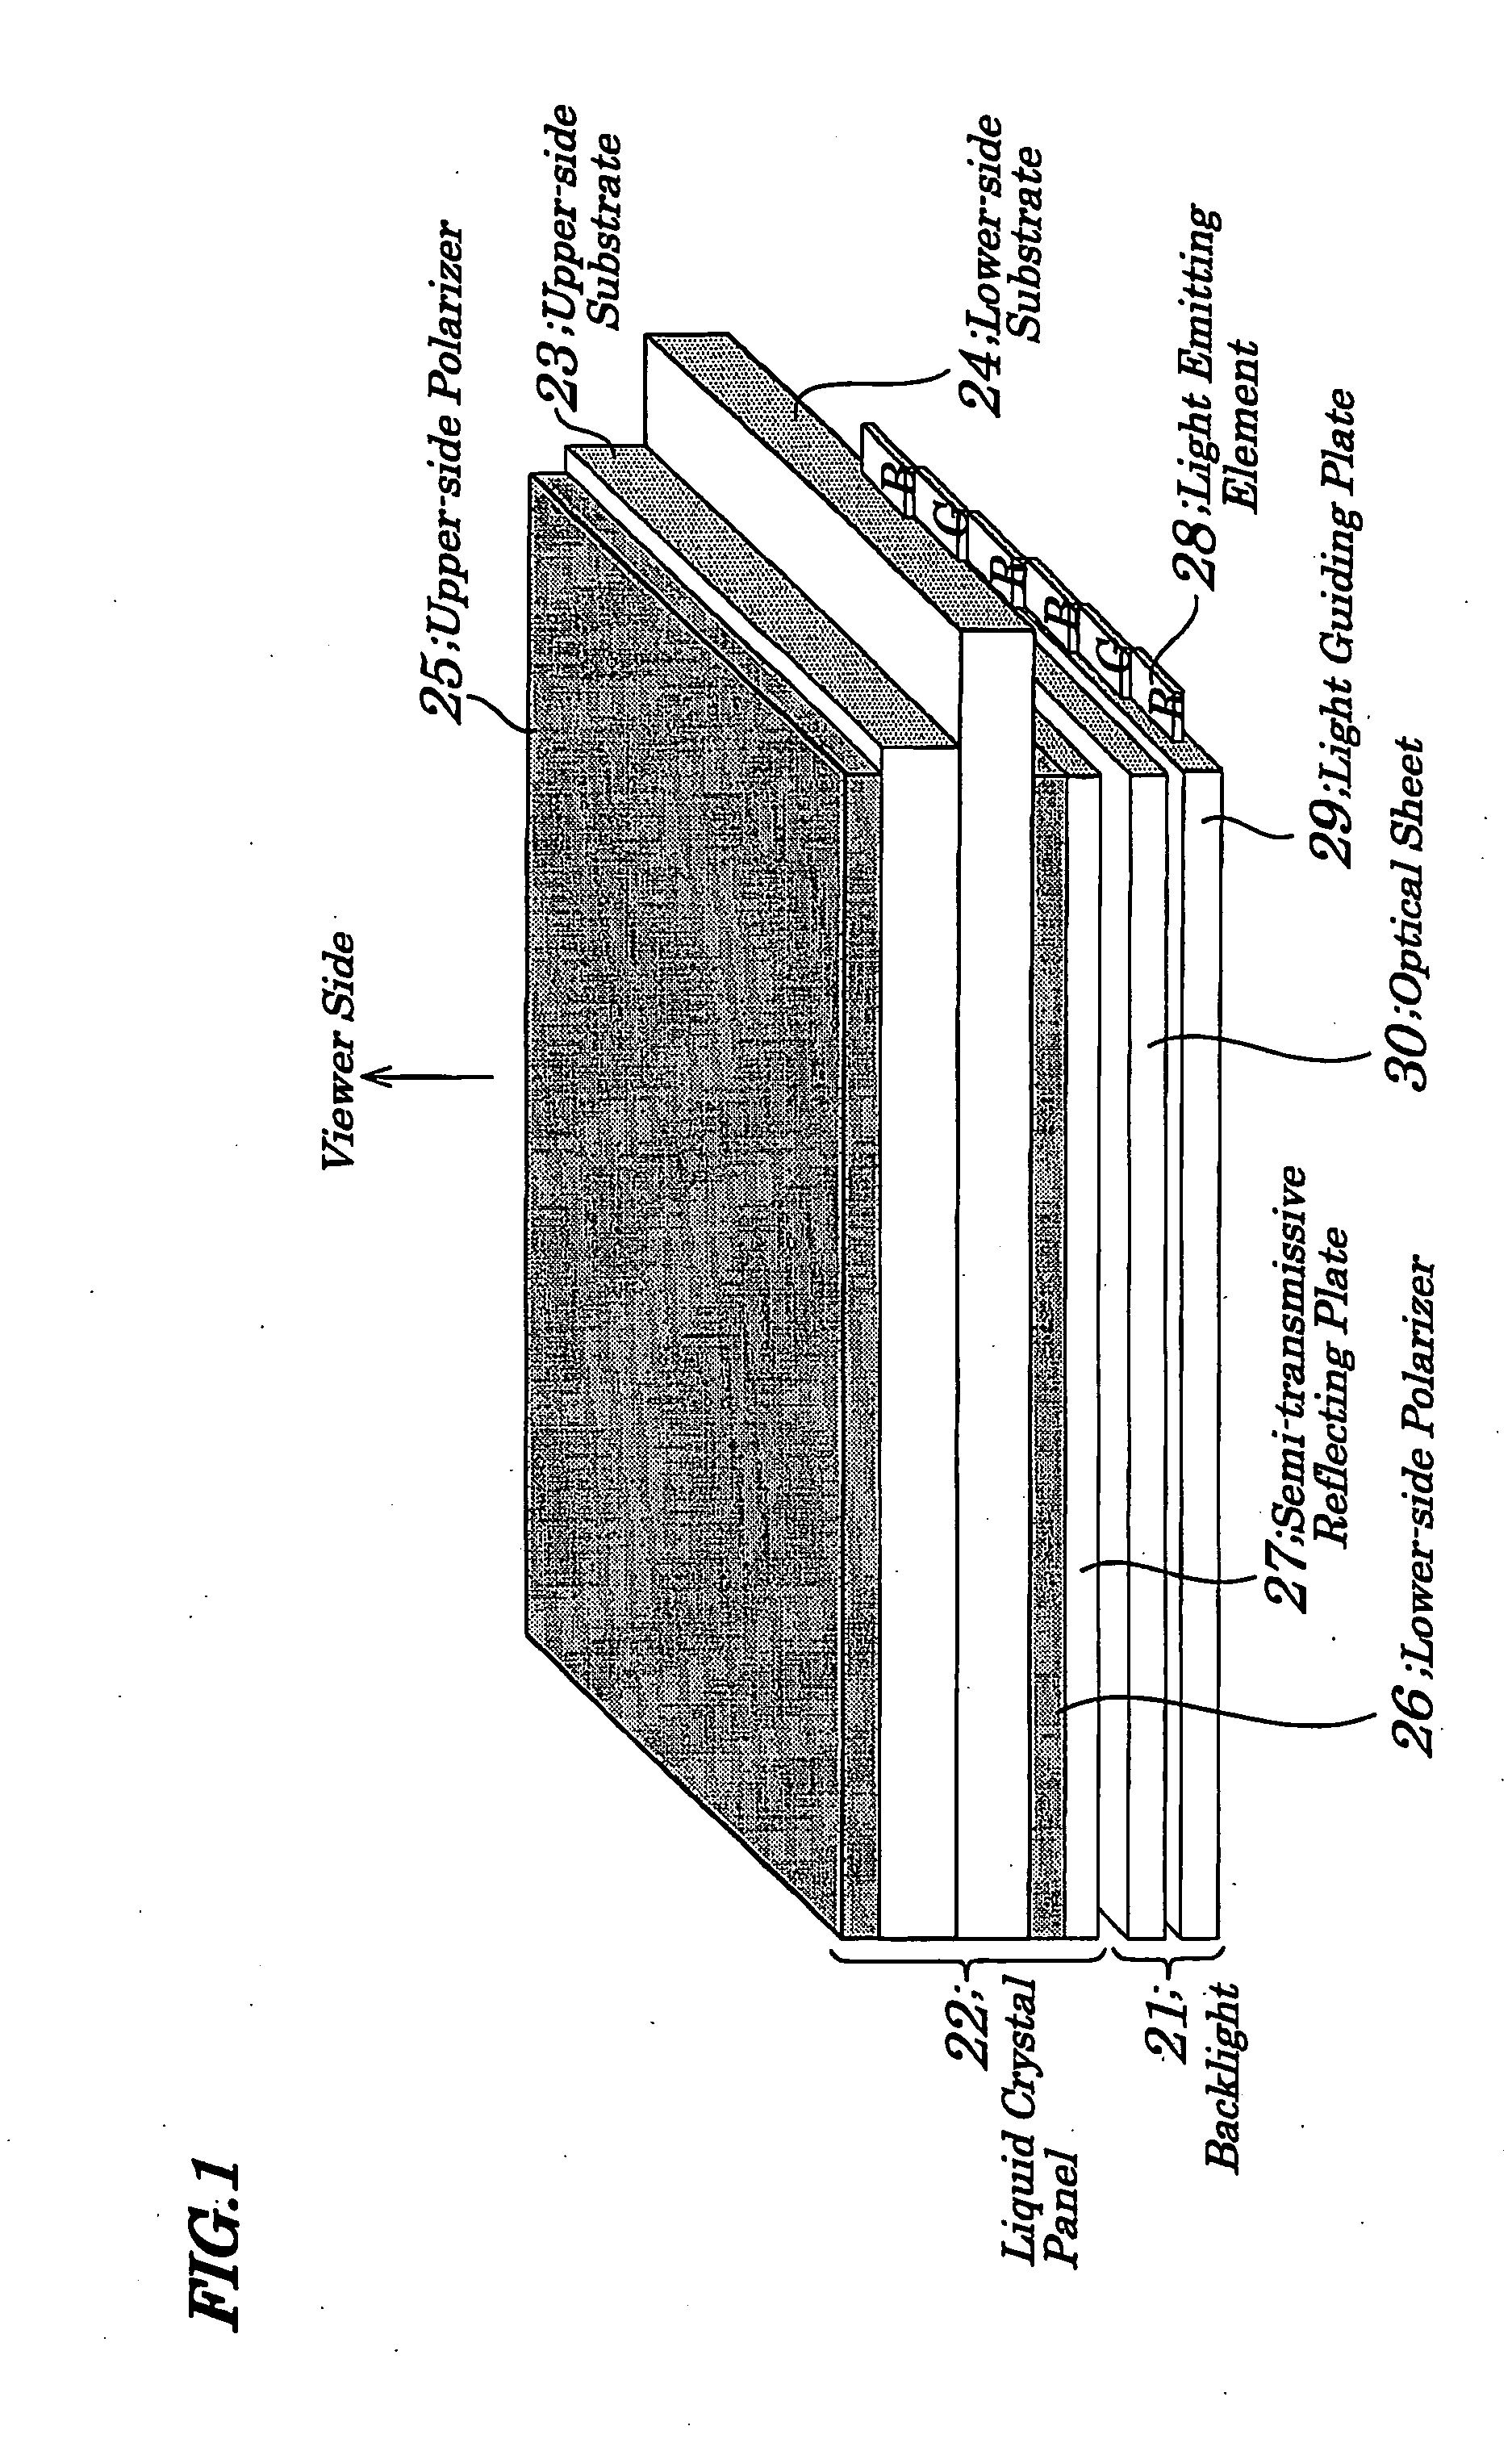 Liquid crystal display device and driving method used in same